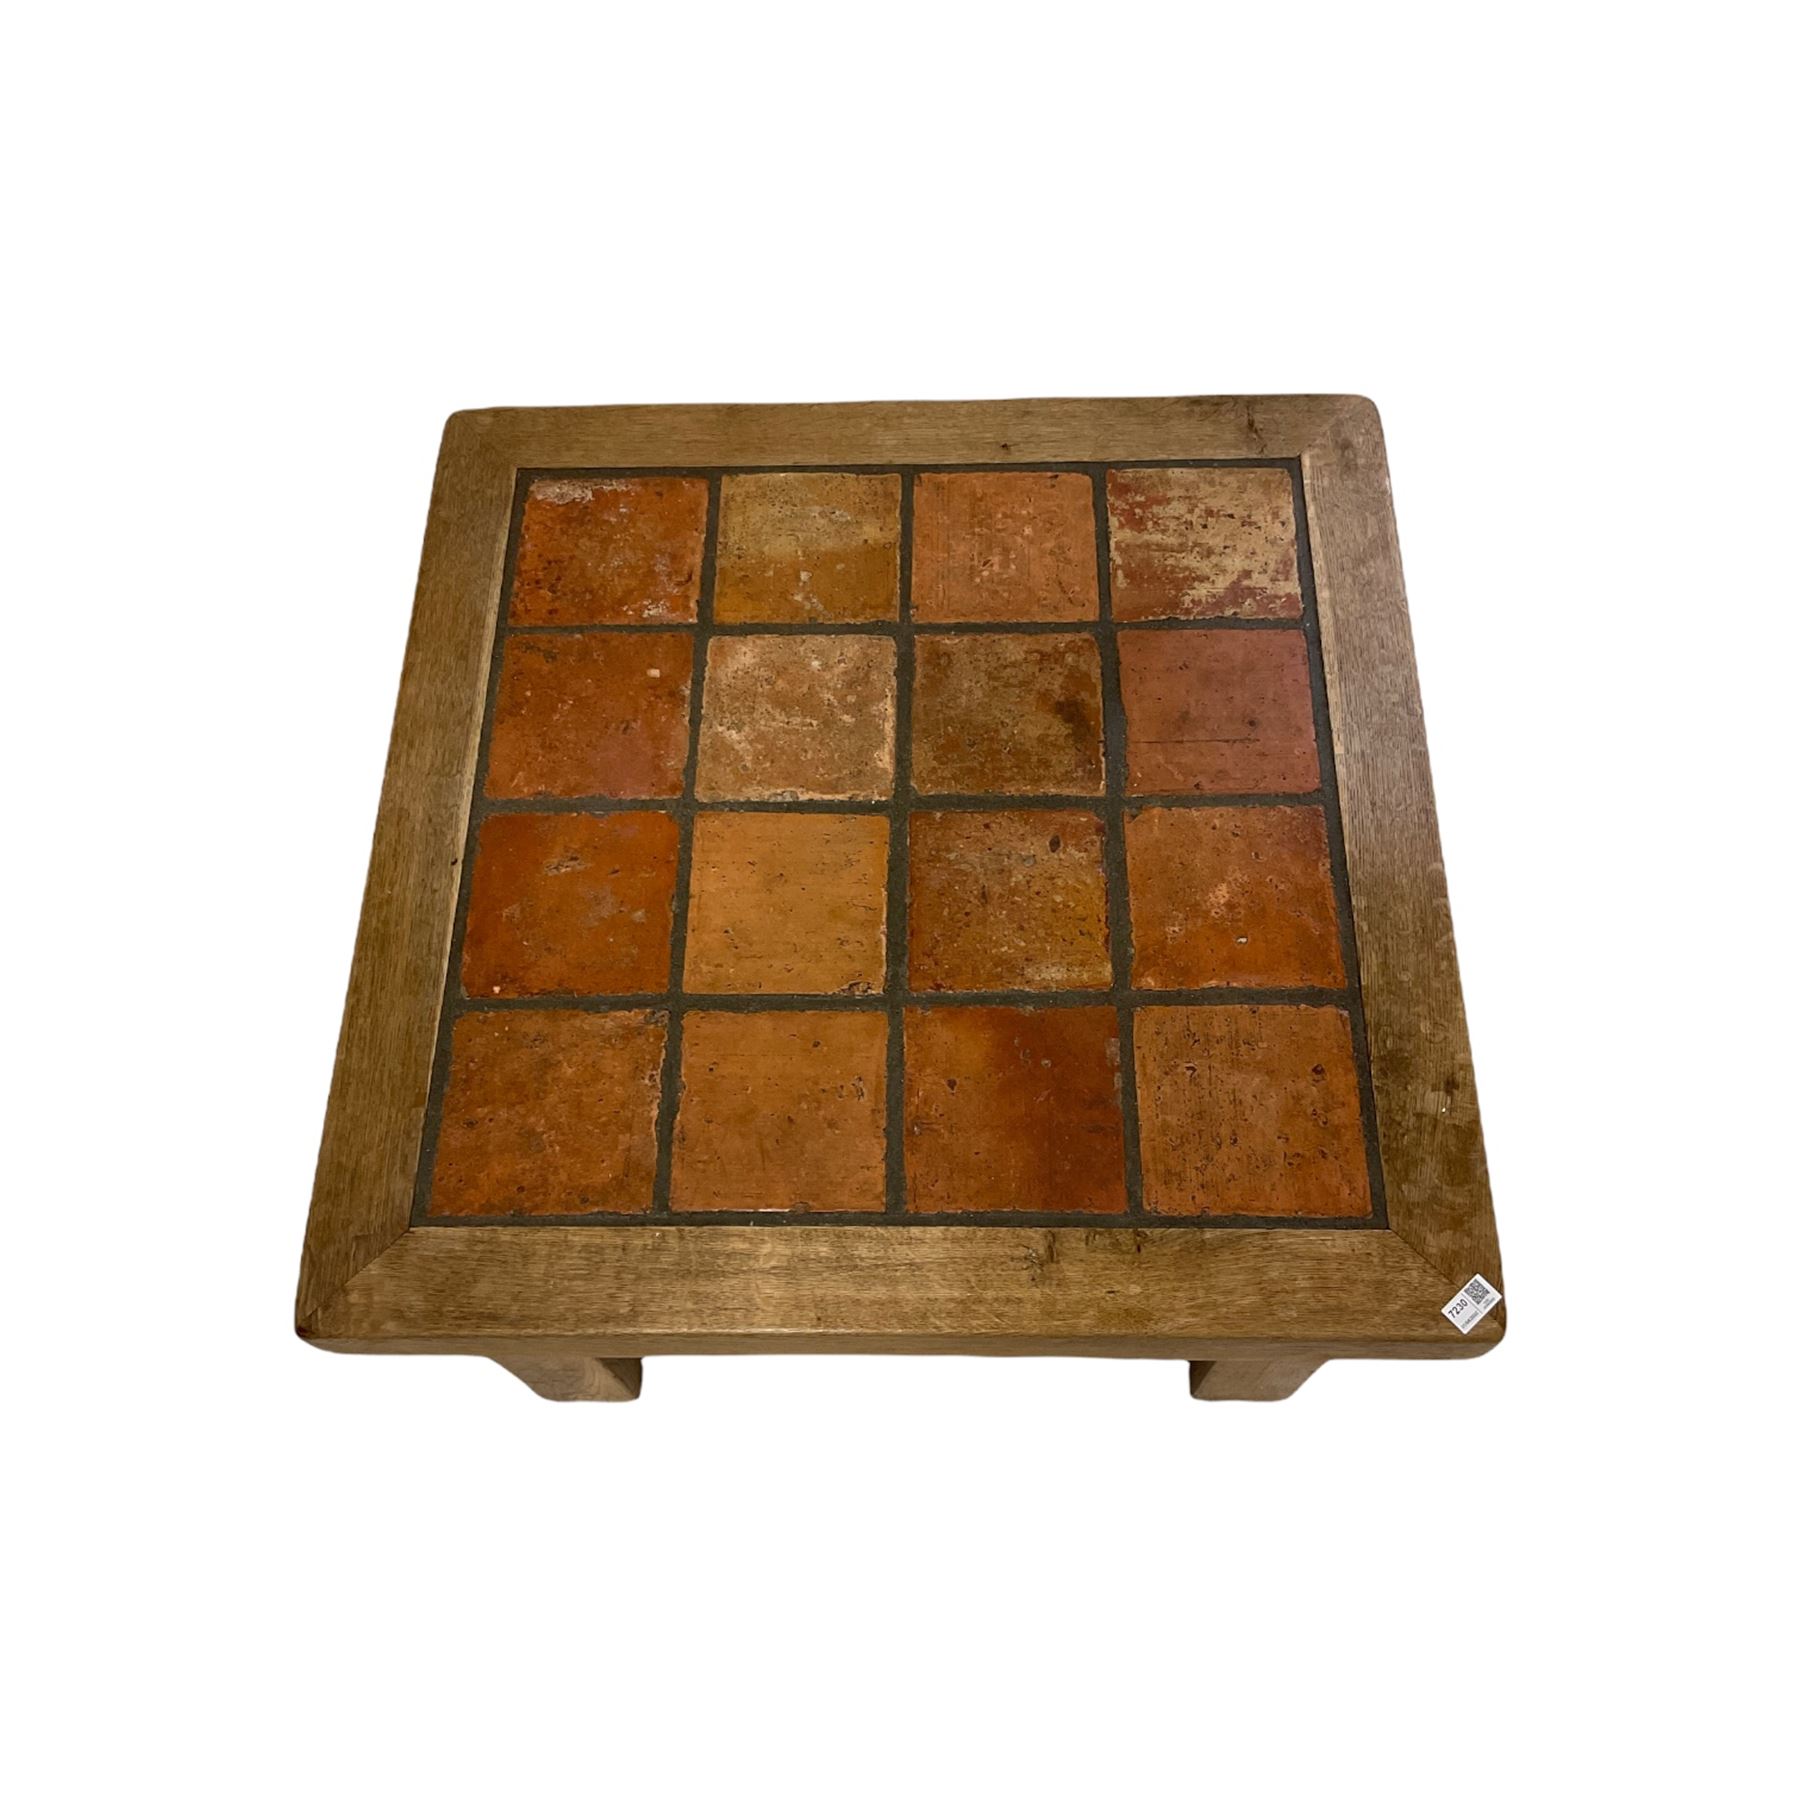 Oak and terracotta tiled coffee table - Image 2 of 2